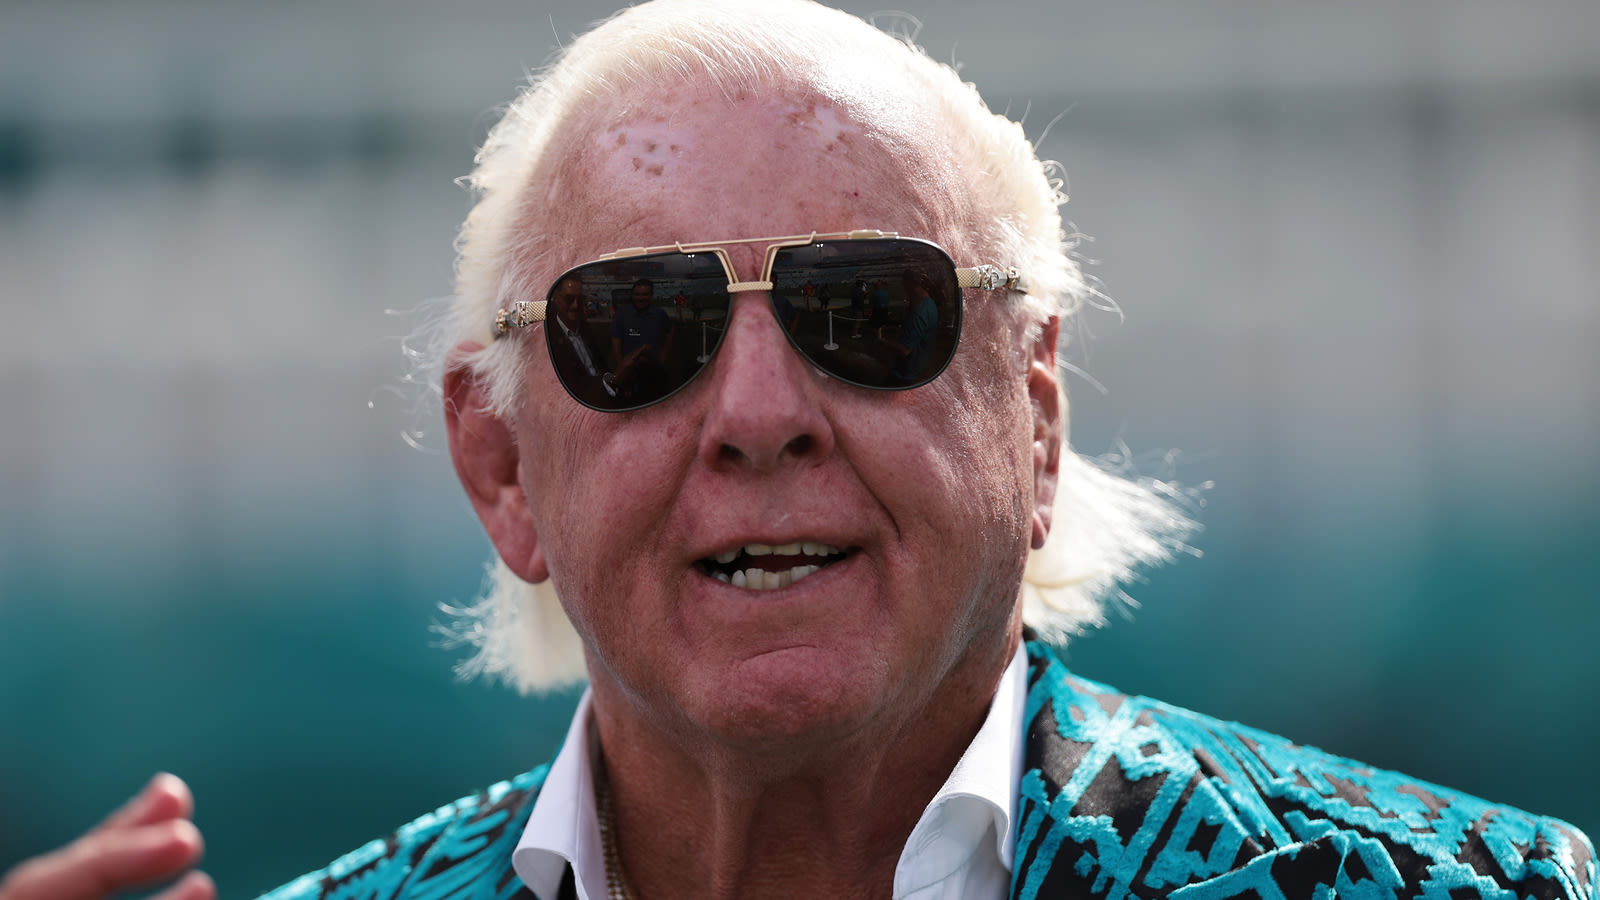 Ric Flair Puts WWE On Blast Following 'Worst Professional Move I've Ever Seen' - Wrestling Inc.